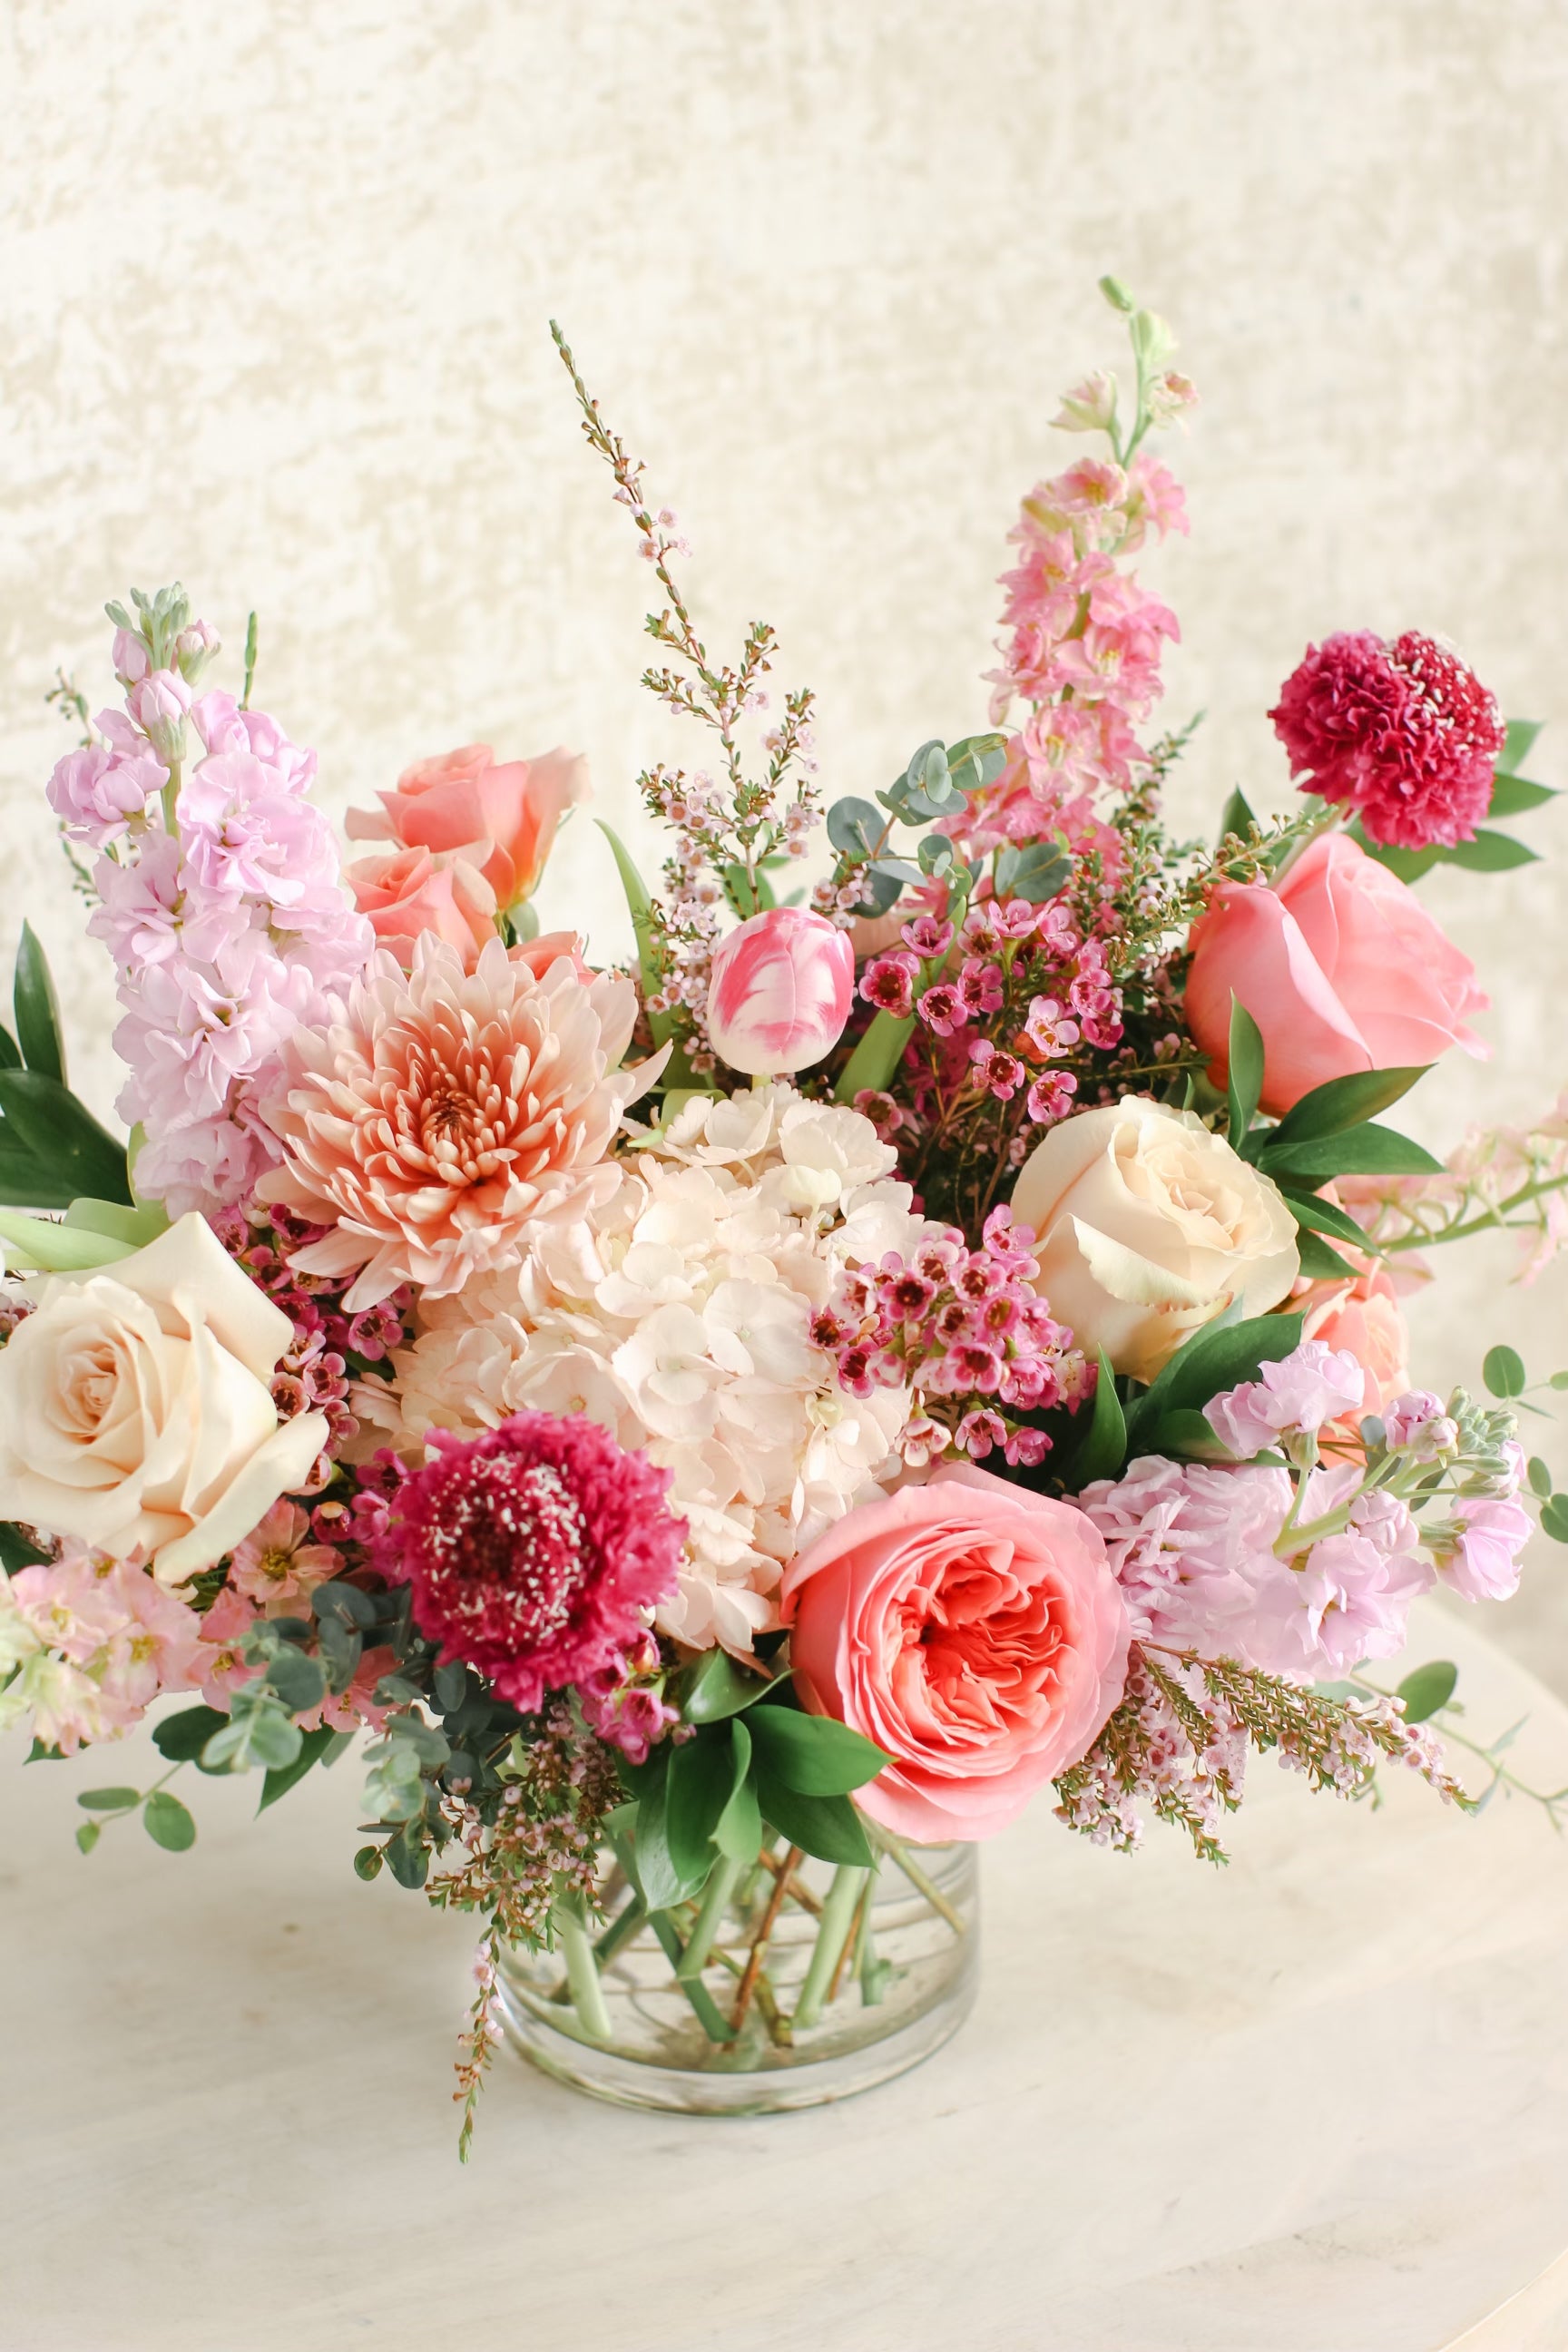 A Prism of Pink Florist's Choice Arrangement – The Bloom Of Time